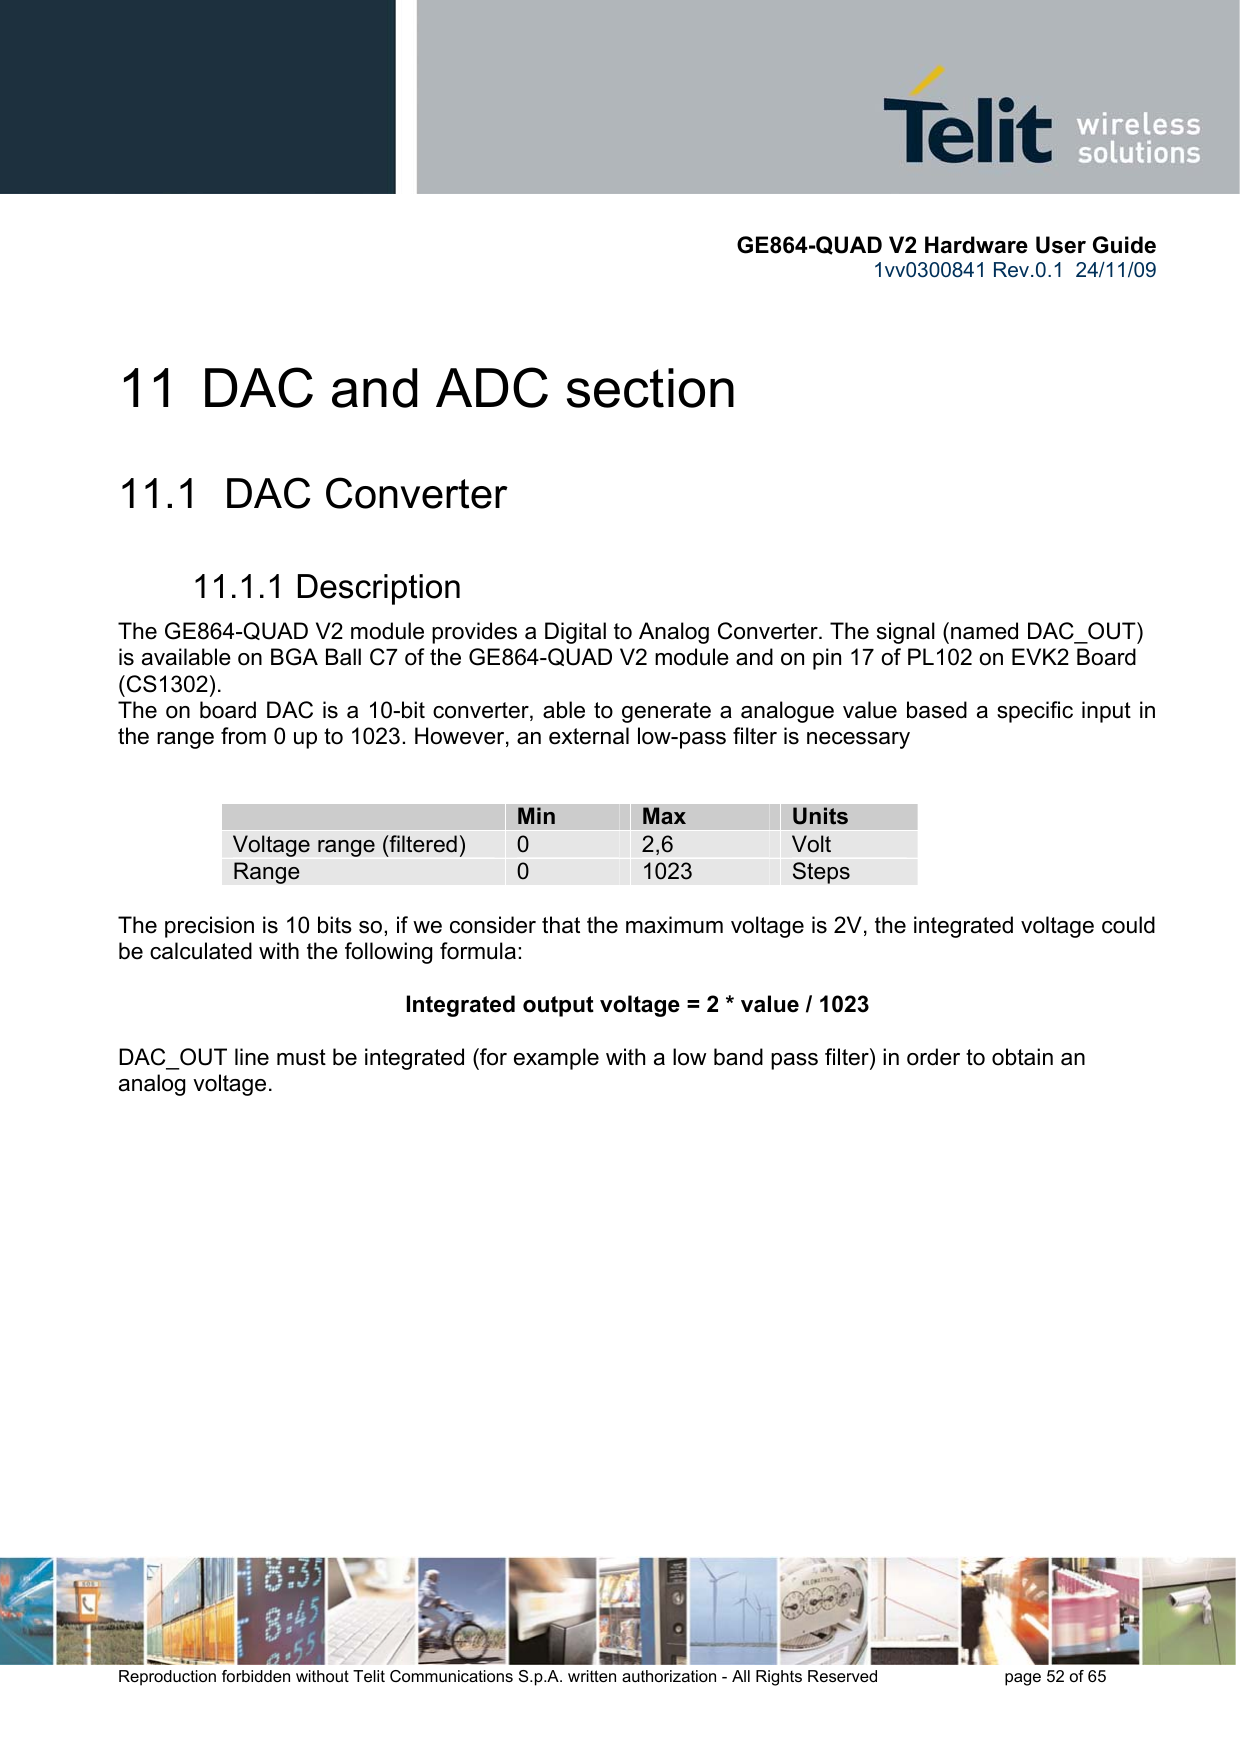       GE864-QUAD V2 Hardware User Guide 1vv0300841 Rev.0.1  24/11/09      Reproduction forbidden without Telit Communications S.p.A. written authorization - All Rights Reserved    page 52 of 65  11  DAC and ADC section 11.1   DAC Converter 11.1.1 Description The GE864-QUAD V2 module provides a Digital to Analog Converter. The signal (named DAC_OUT) is available on BGA Ball C7 of the GE864-QUAD V2 module and on pin 17 of PL102 on EVK2 Board (CS1302). The on board DAC is a 10-bit converter, able to generate a analogue value based a specific input in the range from 0 up to 1023. However, an external low-pass filter is necessary    Min  Max  Units Voltage range (filtered)  0  2,6  Volt Range  0  1023  Steps  The precision is 10 bits so, if we consider that the maximum voltage is 2V, the integrated voltage could be calculated with the following formula:  Integrated output voltage = 2 * value / 1023  DAC_OUT line must be integrated (for example with a low band pass filter) in order to obtain an analog voltage. 